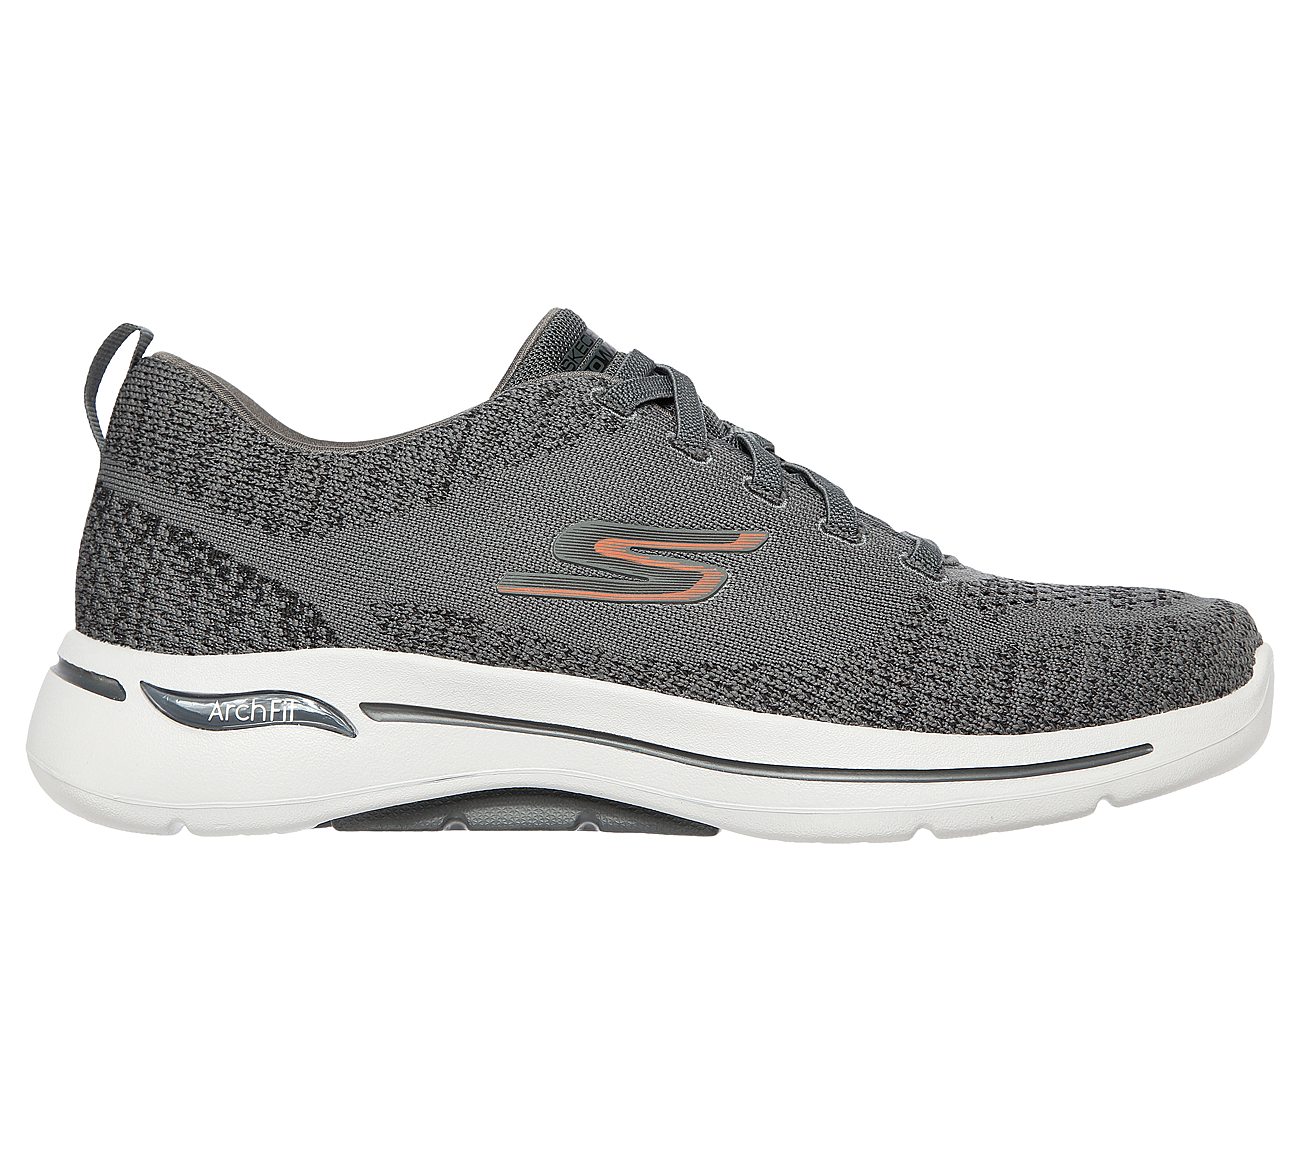 GO WALK ARCH FIT-GRAND SELECT, CCHARCOAL Footwear Right View